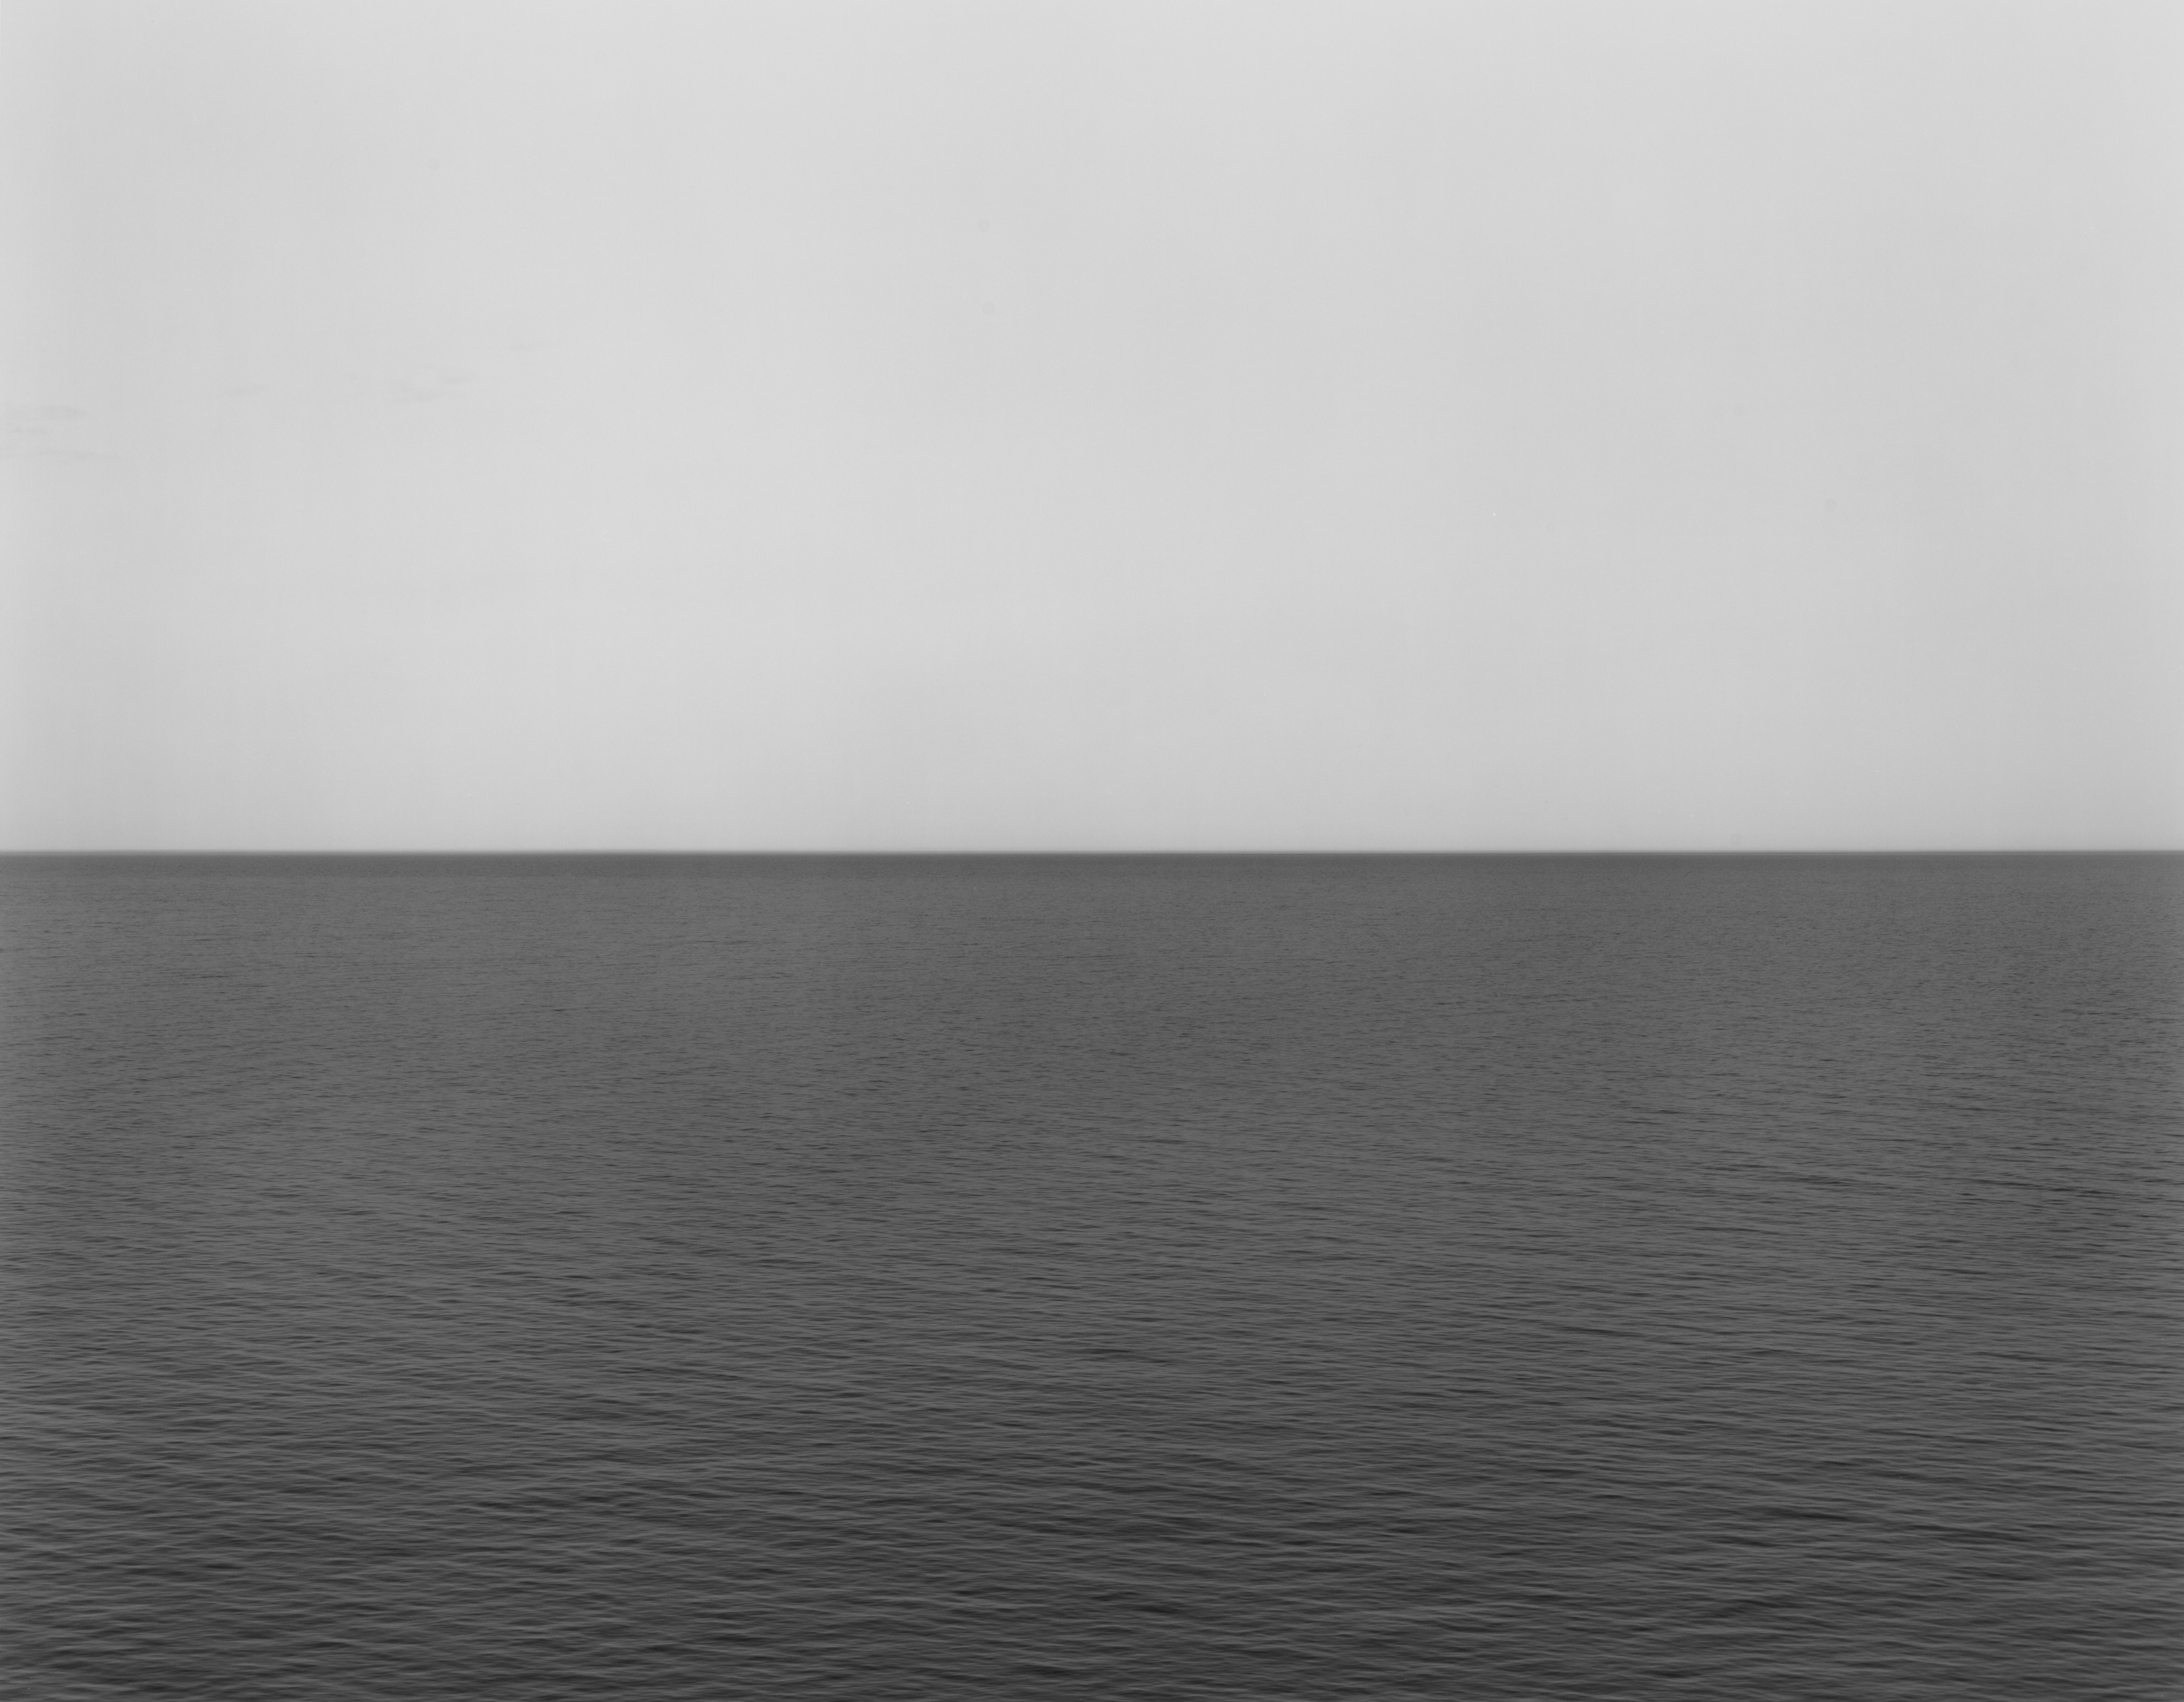 Black and white photograph of the horizon with equal parts sky and sea